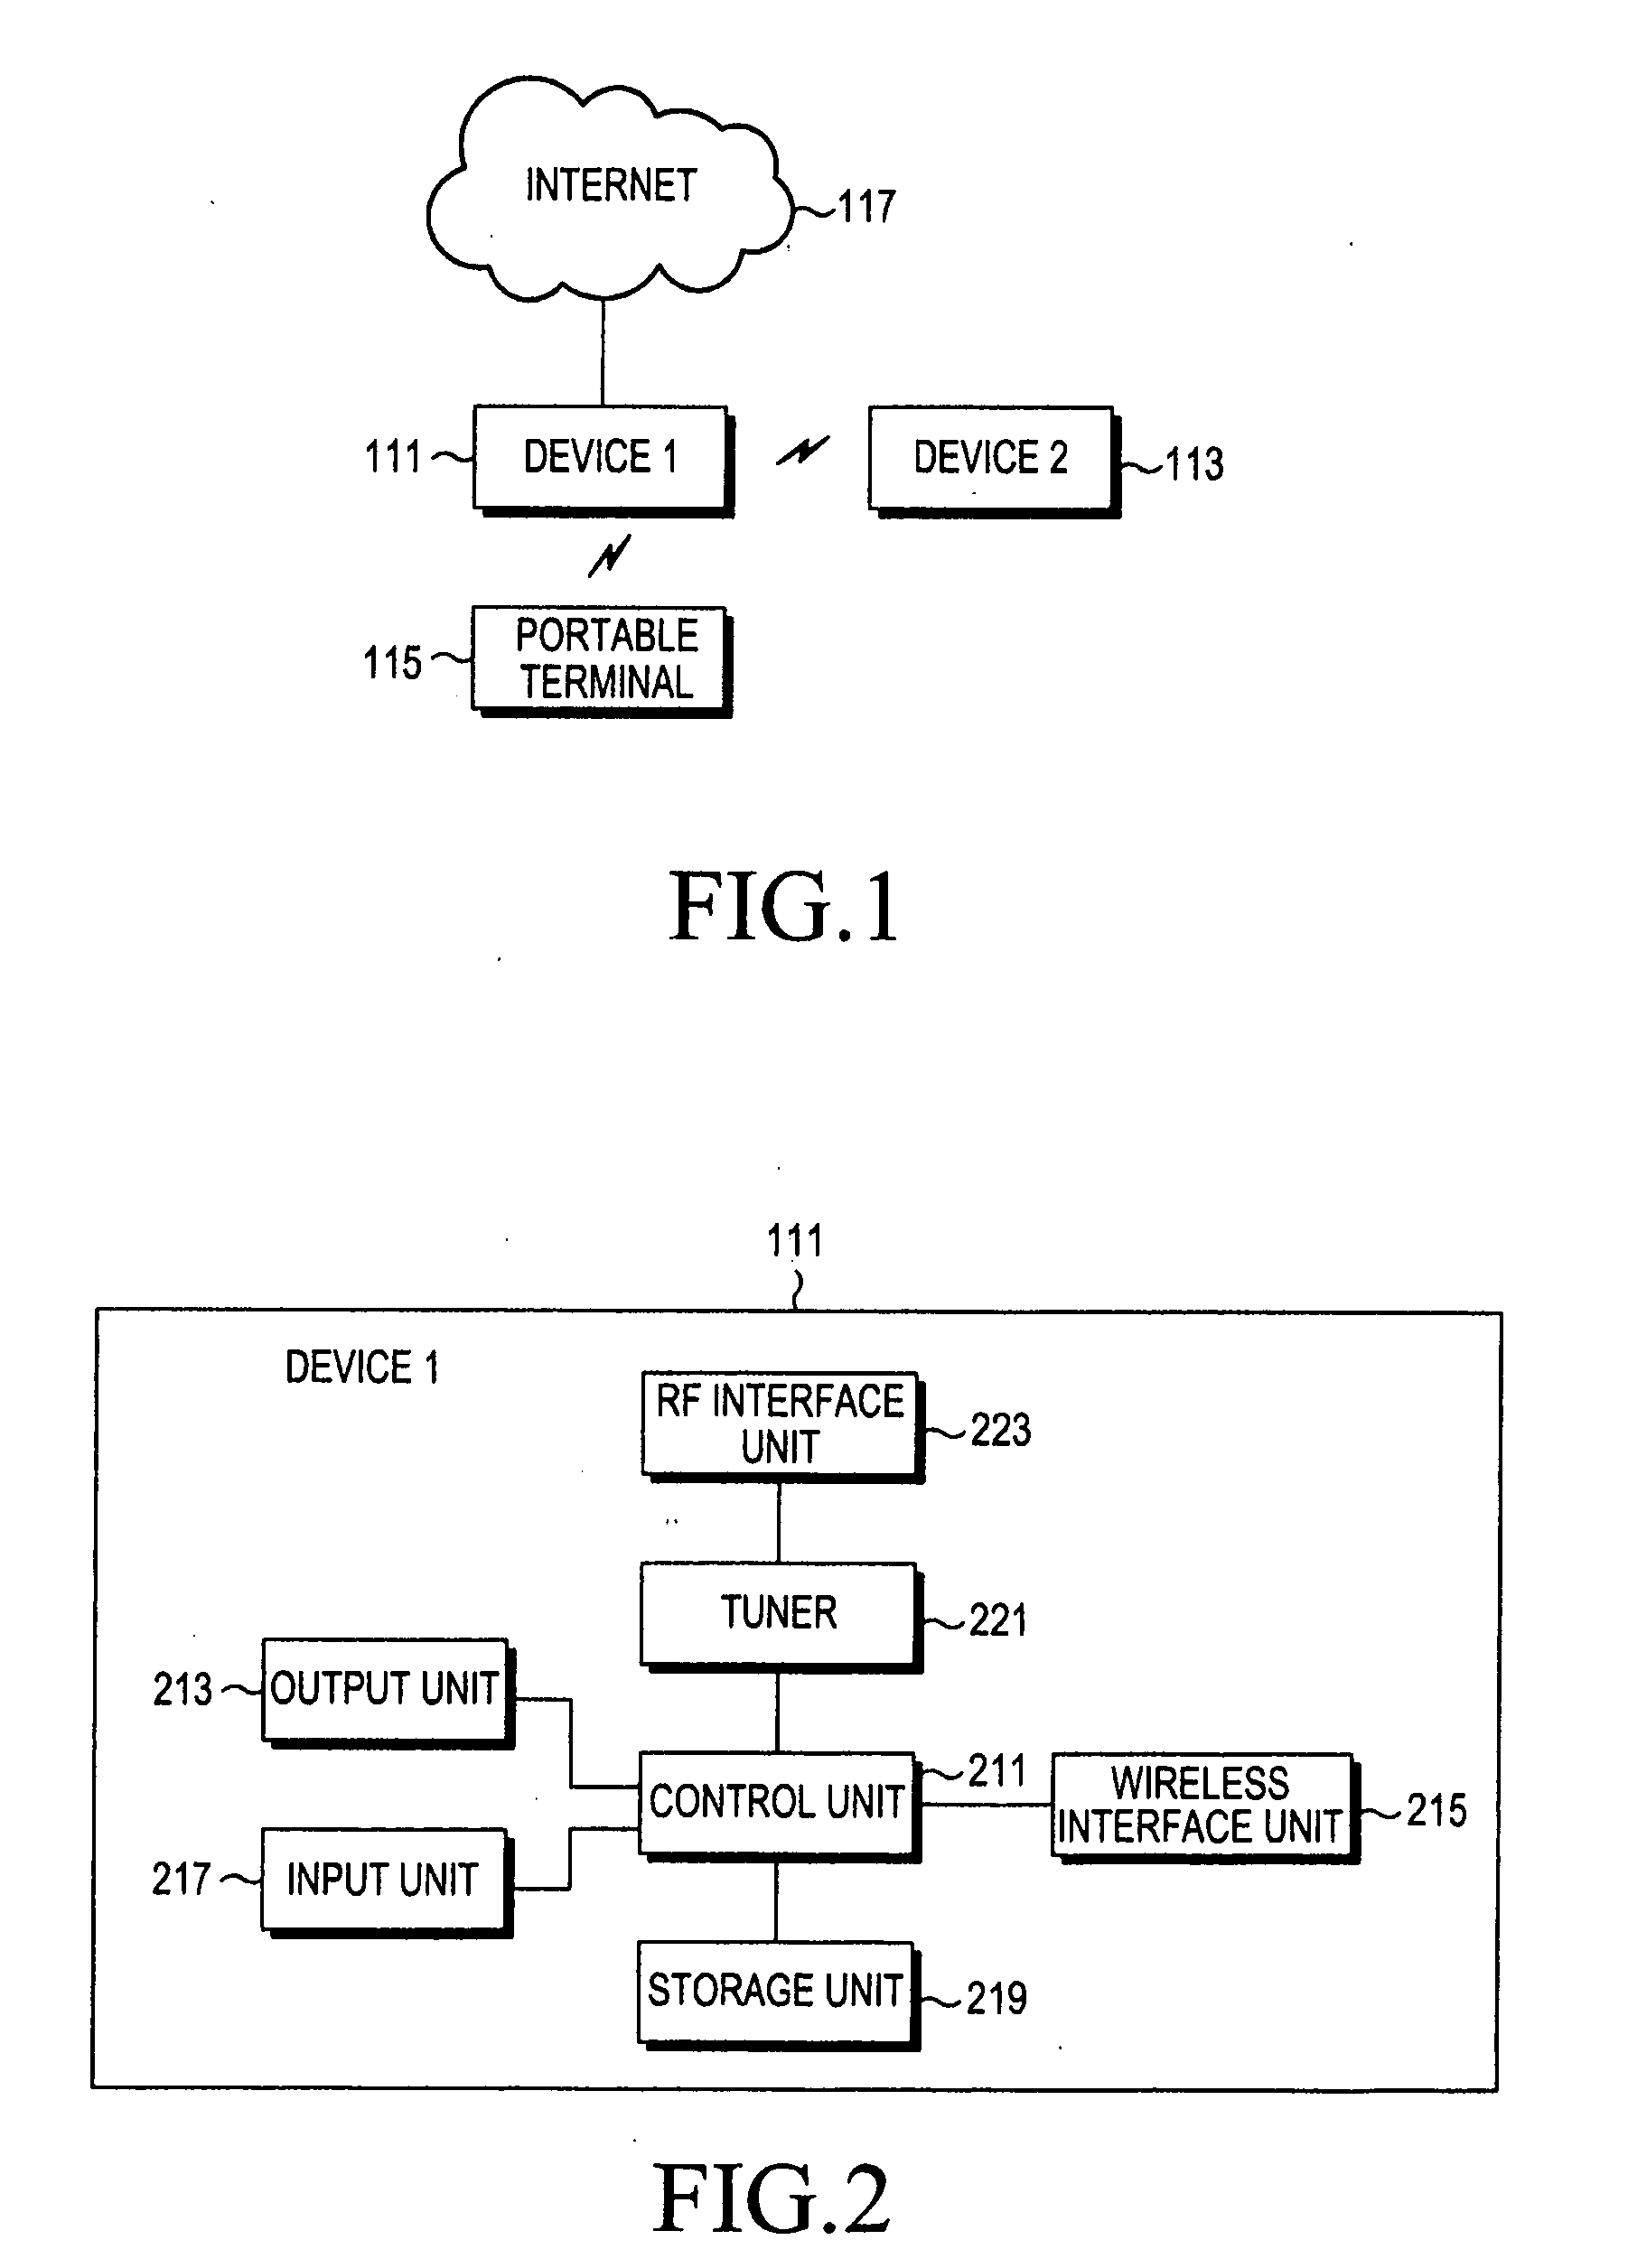 Apparatus and method for controlling devices using portable terminal in device automation system